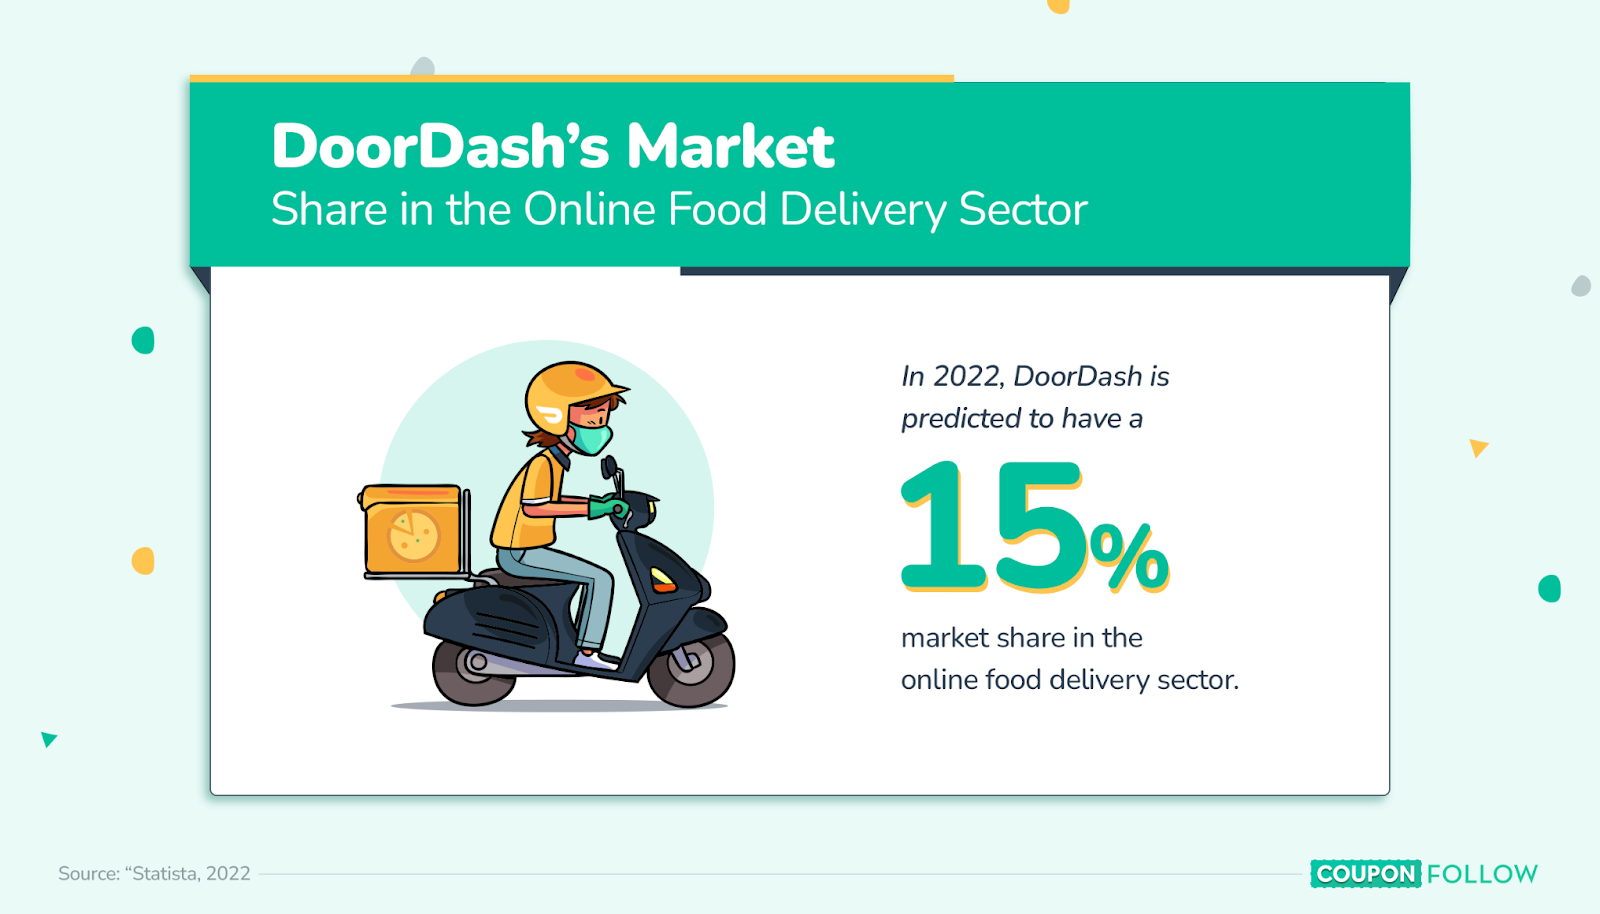 image showing DoorDash’s market share in the online food delivery sector